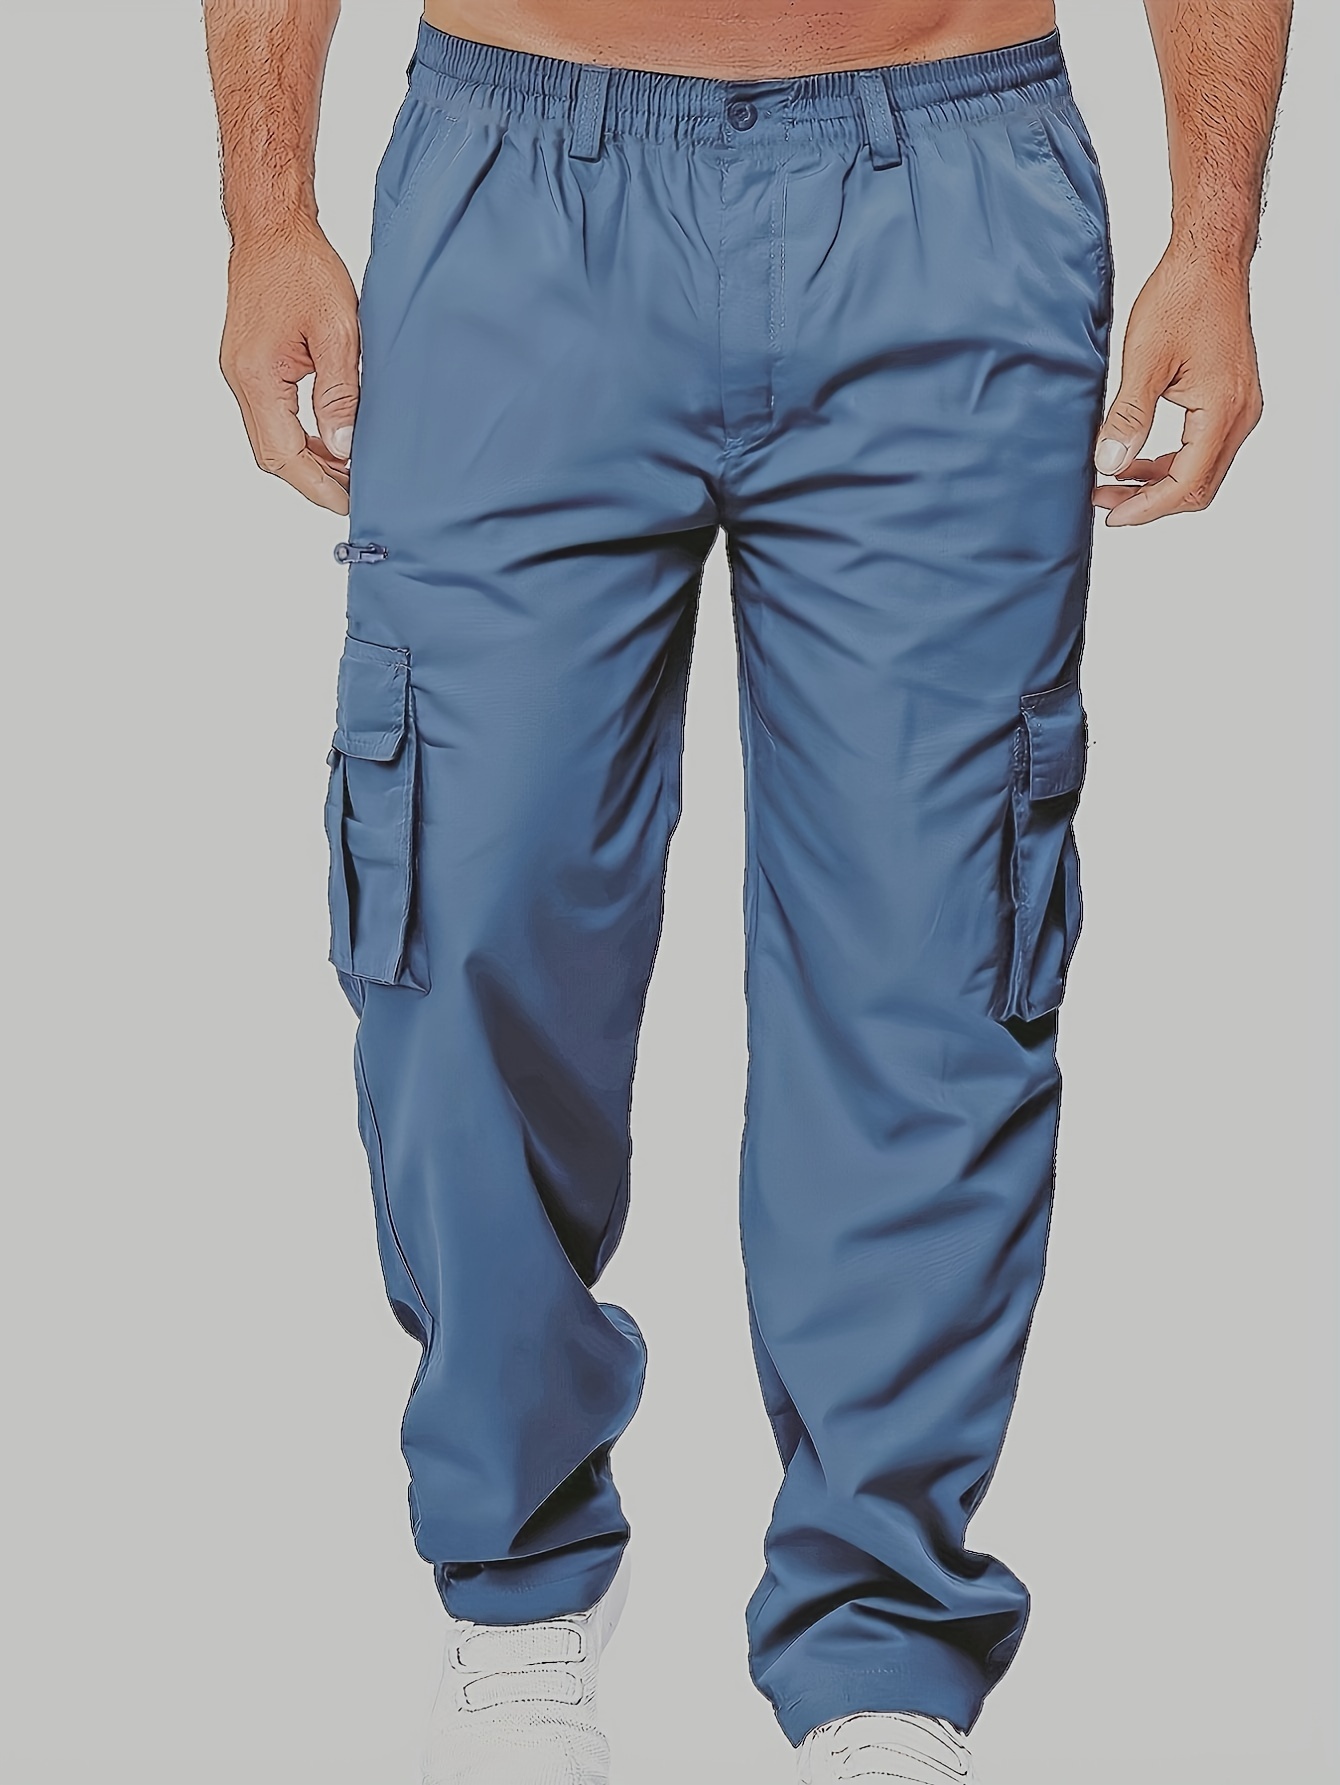 Buy Cargo Pant with Big Pockets - Shoptery